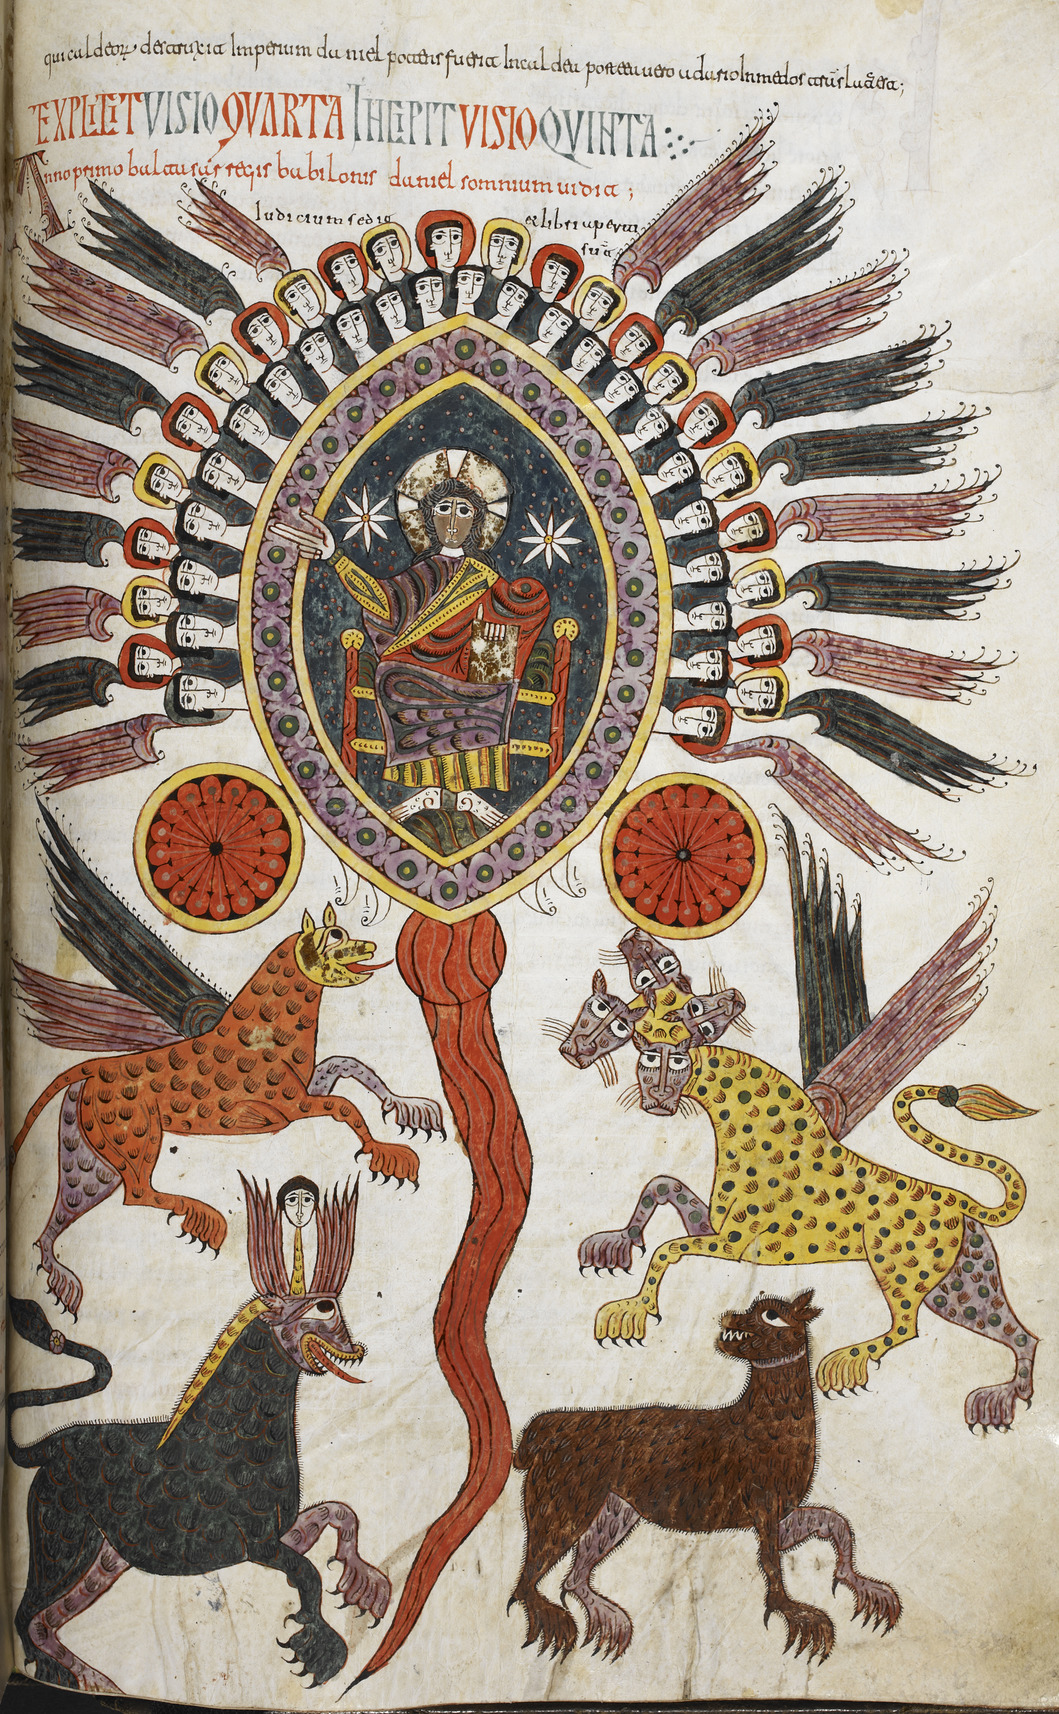 Daniel's_vision_of_the_four_beasts_from_the_sea_and_the_Ancient_of_Days_-_Silos_Apocalypse_(1109),_f.240_-_BL_Add_MS_11695